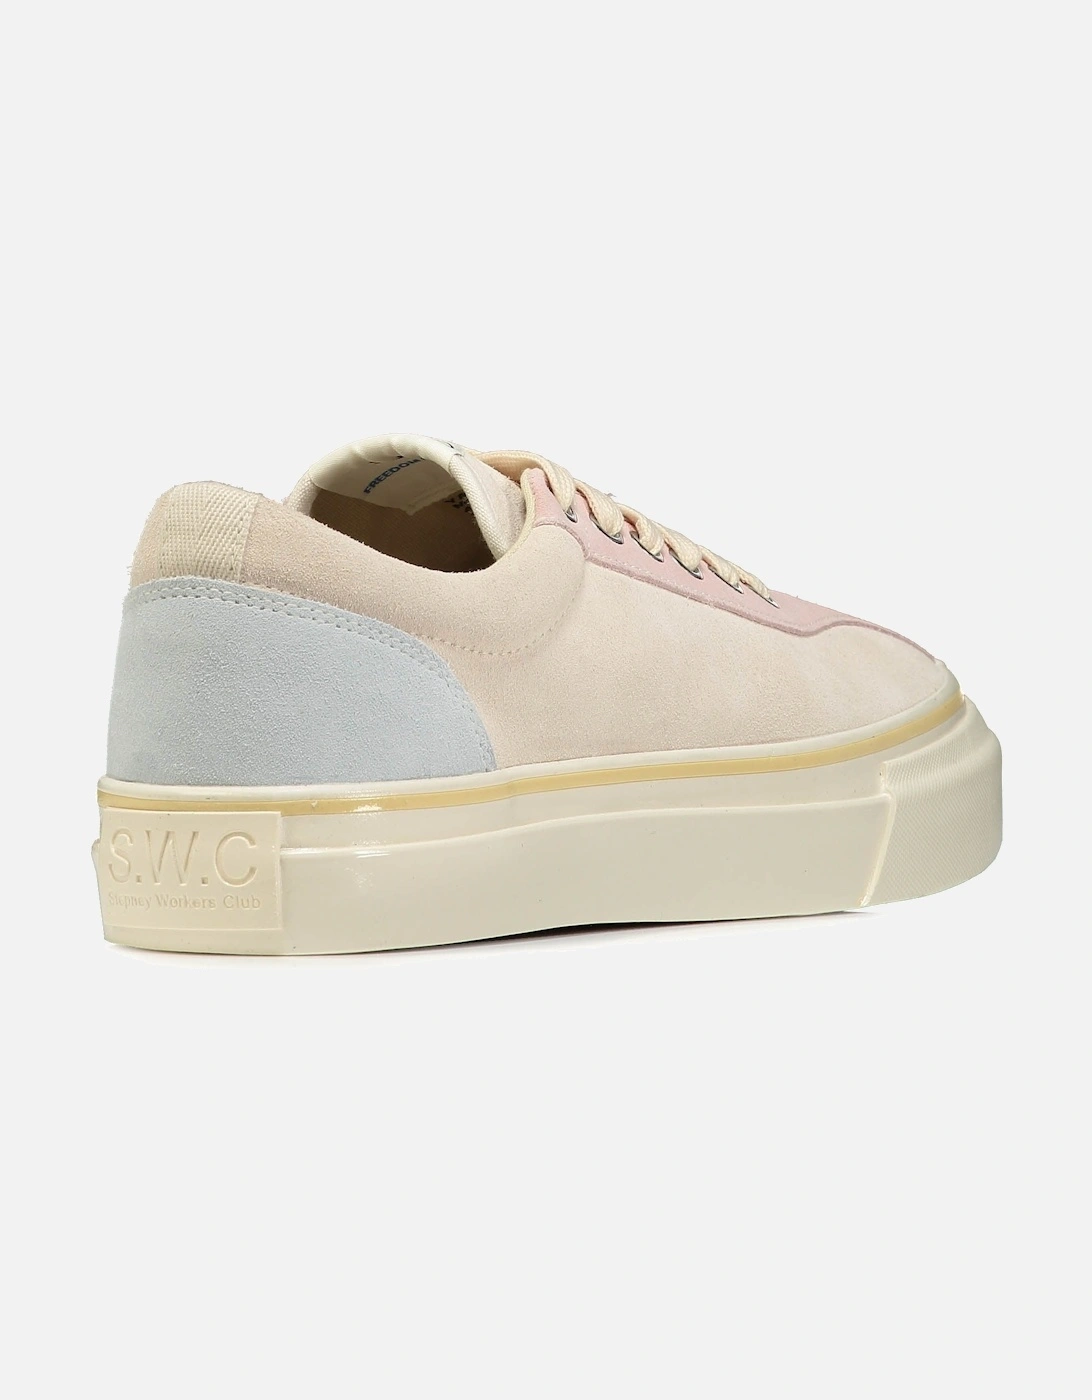 Dellow Suede Trainers - Pastel